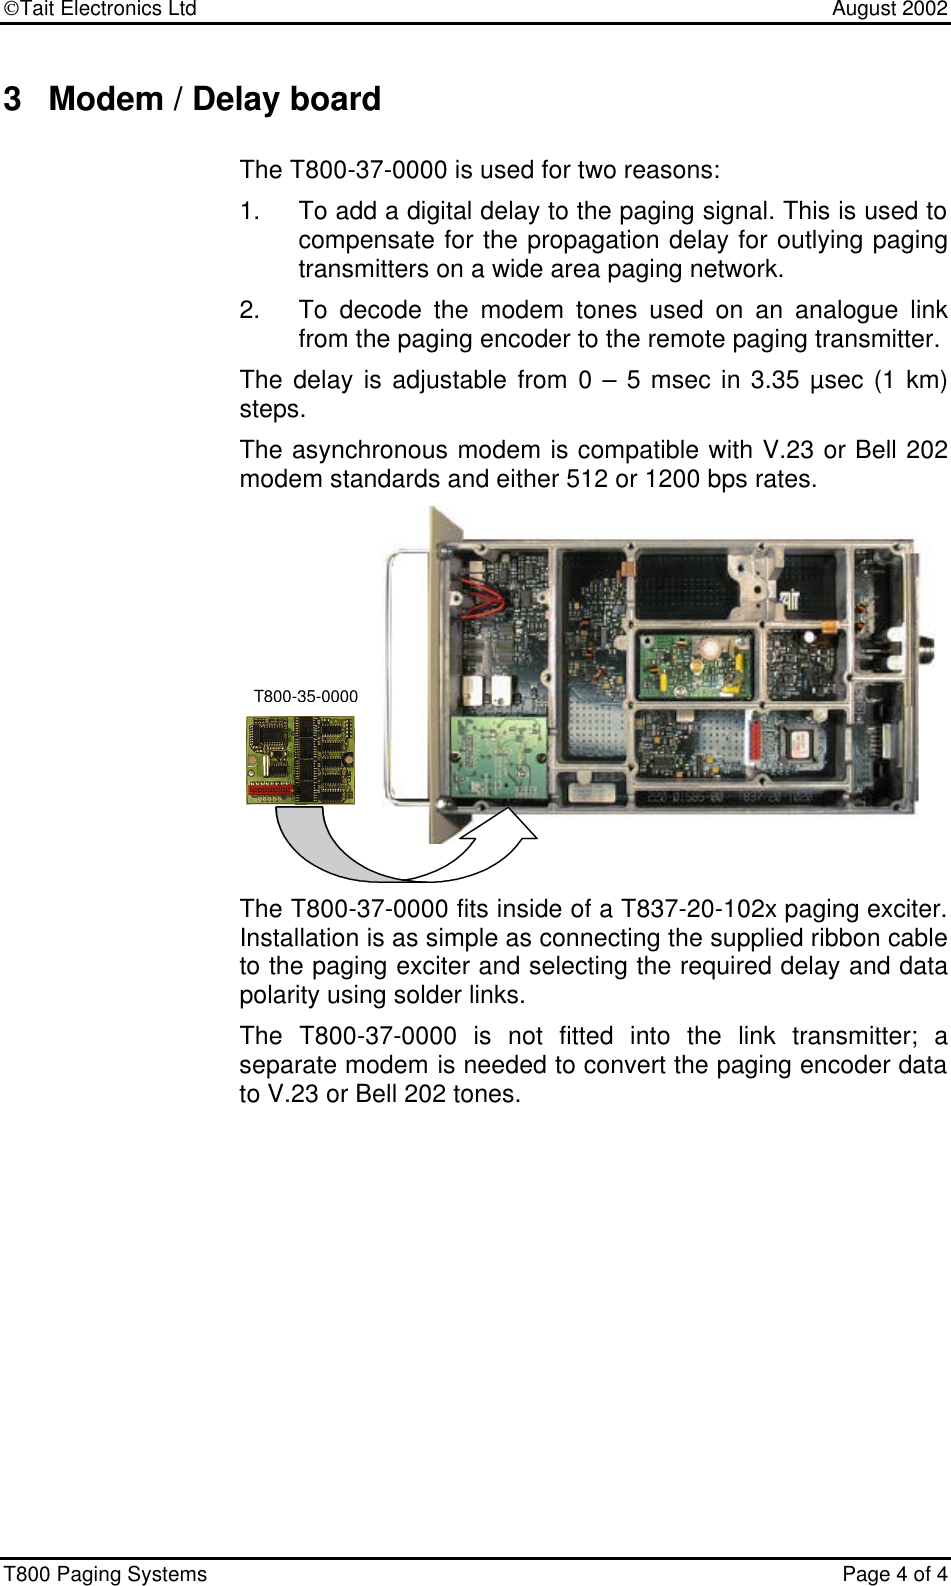 Tait Electronics Ltd    August 2002 T800 Paging Systems  Page 4 of 4  3 Modem / Delay board The T800-37-0000 is used for two reasons: 1. To add a digital delay to the paging signal. This is used to compensate for the propagation delay for outlying paging transmitters on a wide area paging network. 2. To decode the modem tones used on an analogue link from the paging encoder to the remote paging transmitter.  The delay is adjustable from 0 – 5 msec in 3.35 µsec (1 km) steps.   The asynchronous modem is compatible with V.23 or Bell 202 modem standards and either 512 or 1200 bps rates.   The T800-37-0000 fits inside of a T837-20-102x paging exciter.  Installation is as simple as connecting the supplied ribbon cable to the paging exciter and selecting the required delay and data polarity using solder links.   The T800-37-0000 is not fitted into the link transmitter; a separate modem is needed to convert the paging encoder data to V.23 or Bell 202 tones. T800-35-0000 